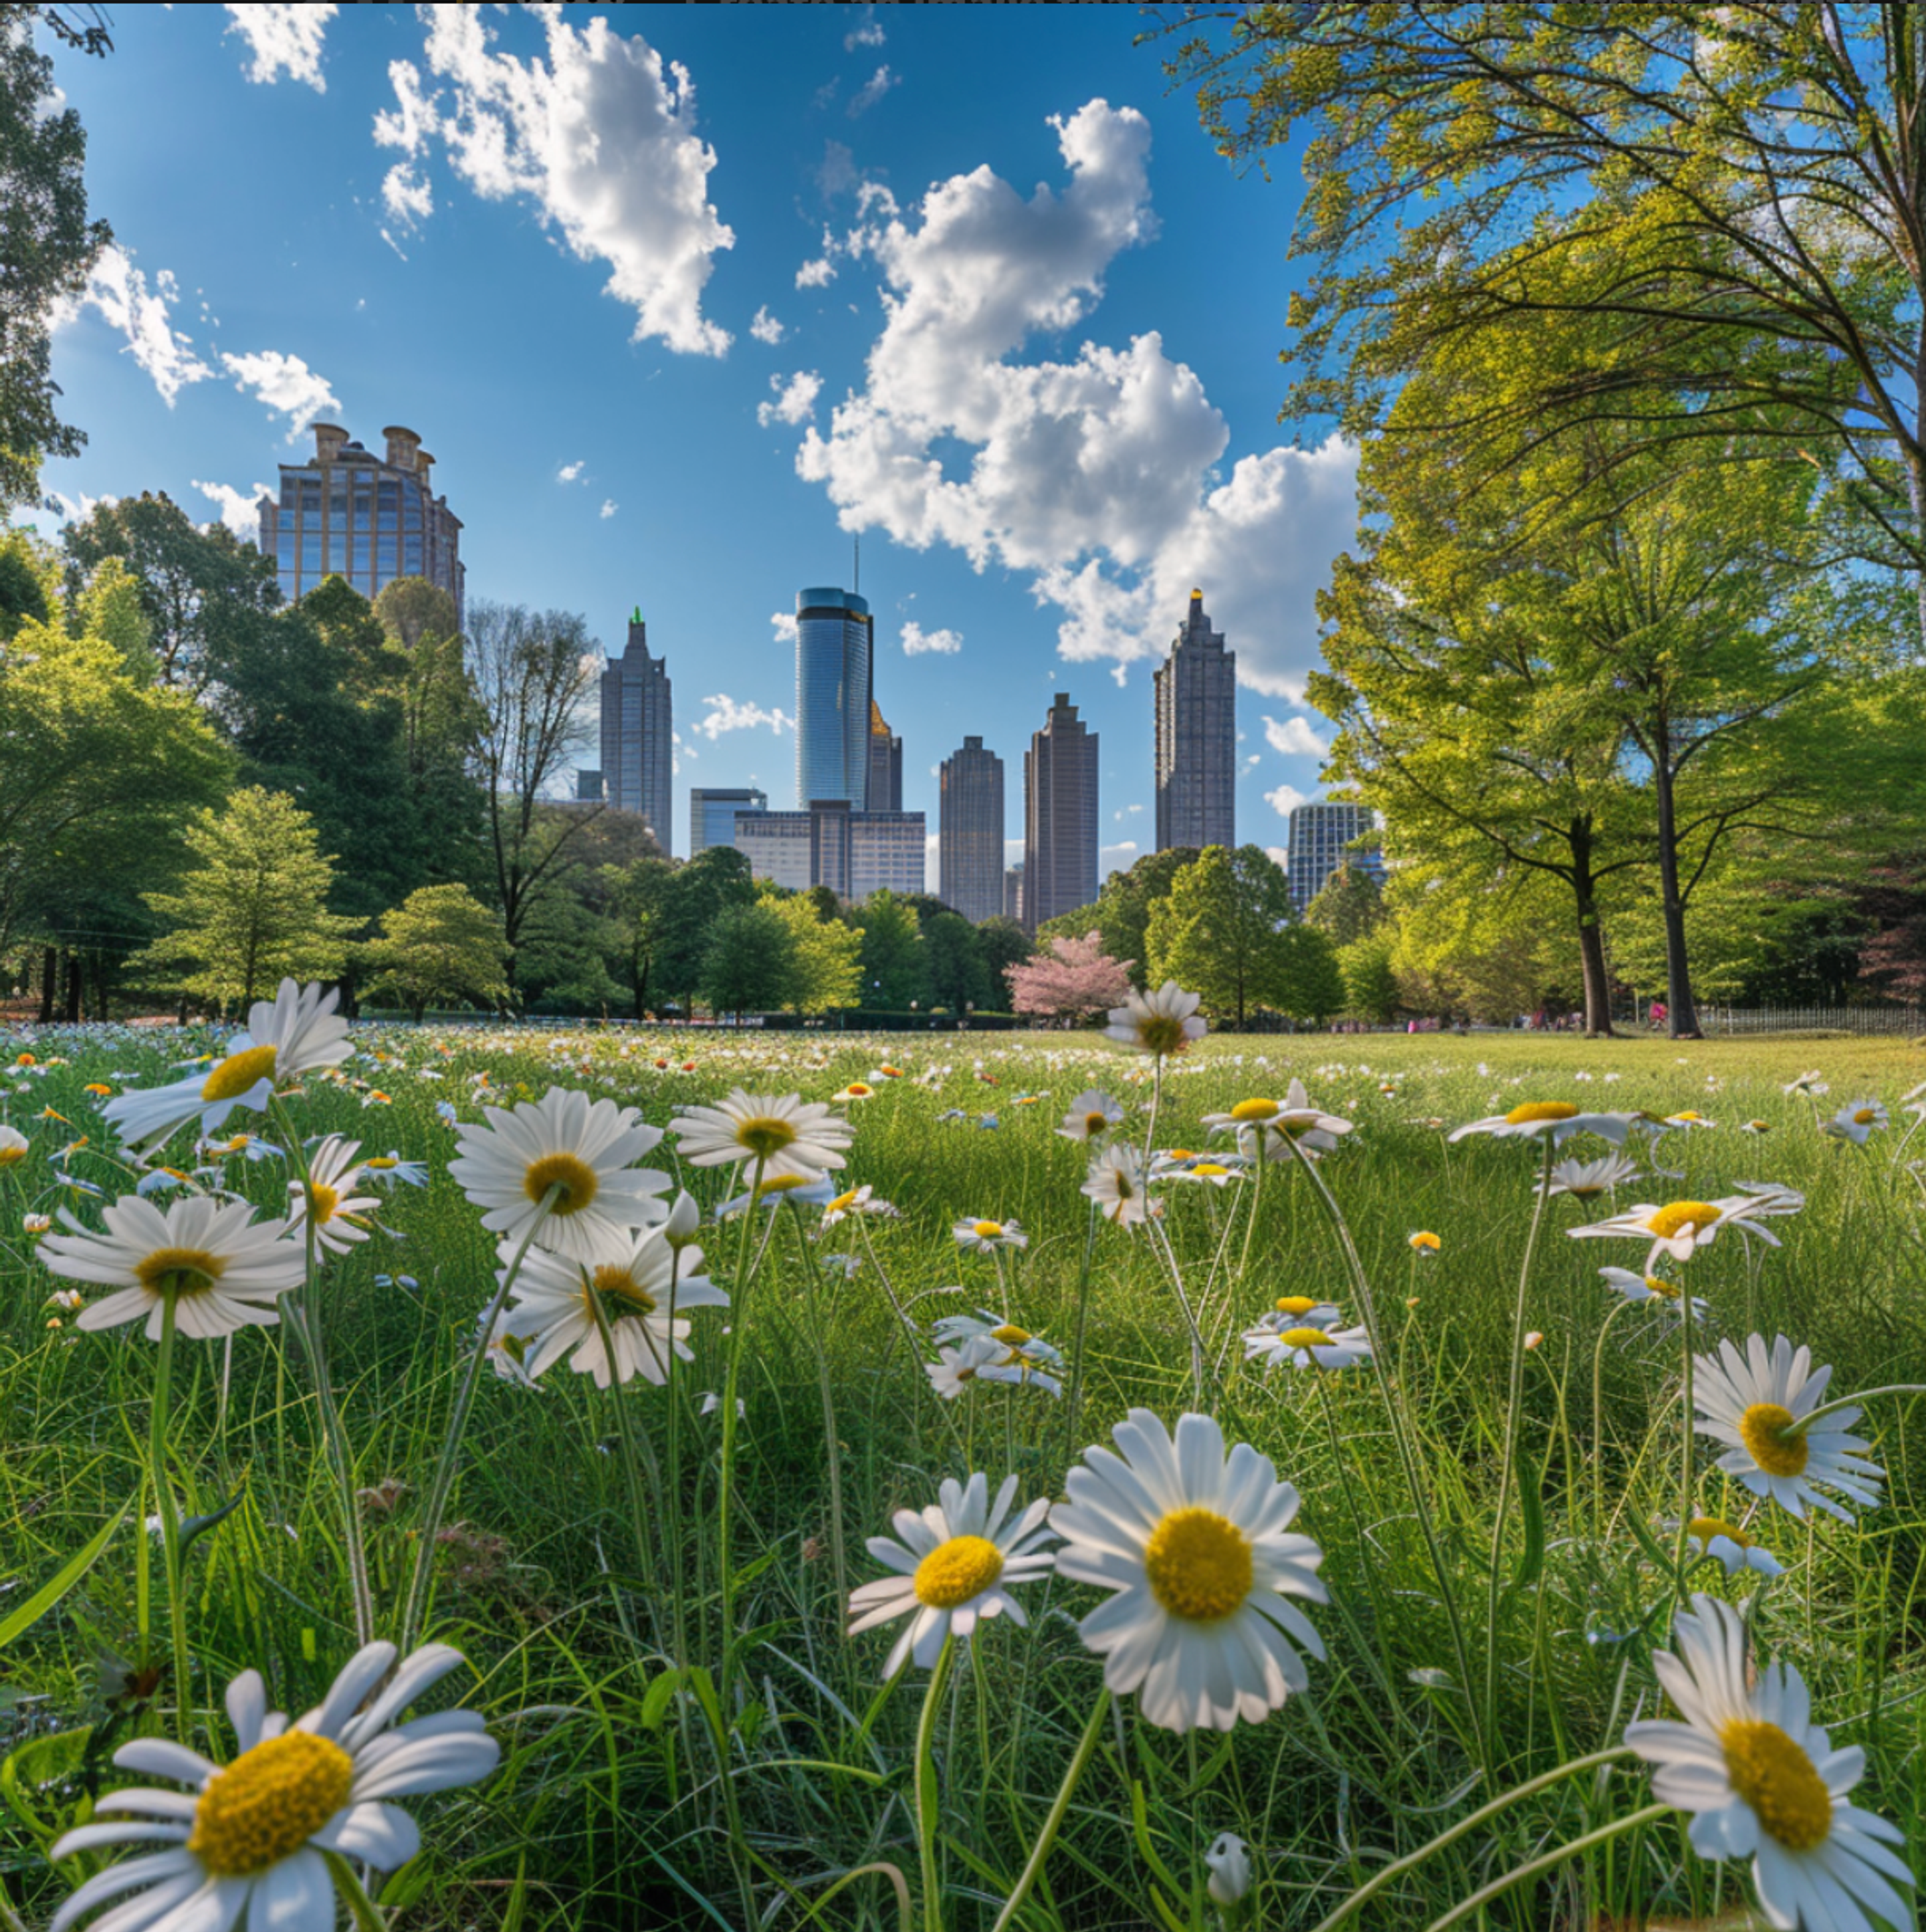 Vibrant field of daisies in Atlanta's Piedmont Park with a view of the city skyline against a clear blue sky, showcasing the harmonious blend of nature and urban life in the heart of Georgia.